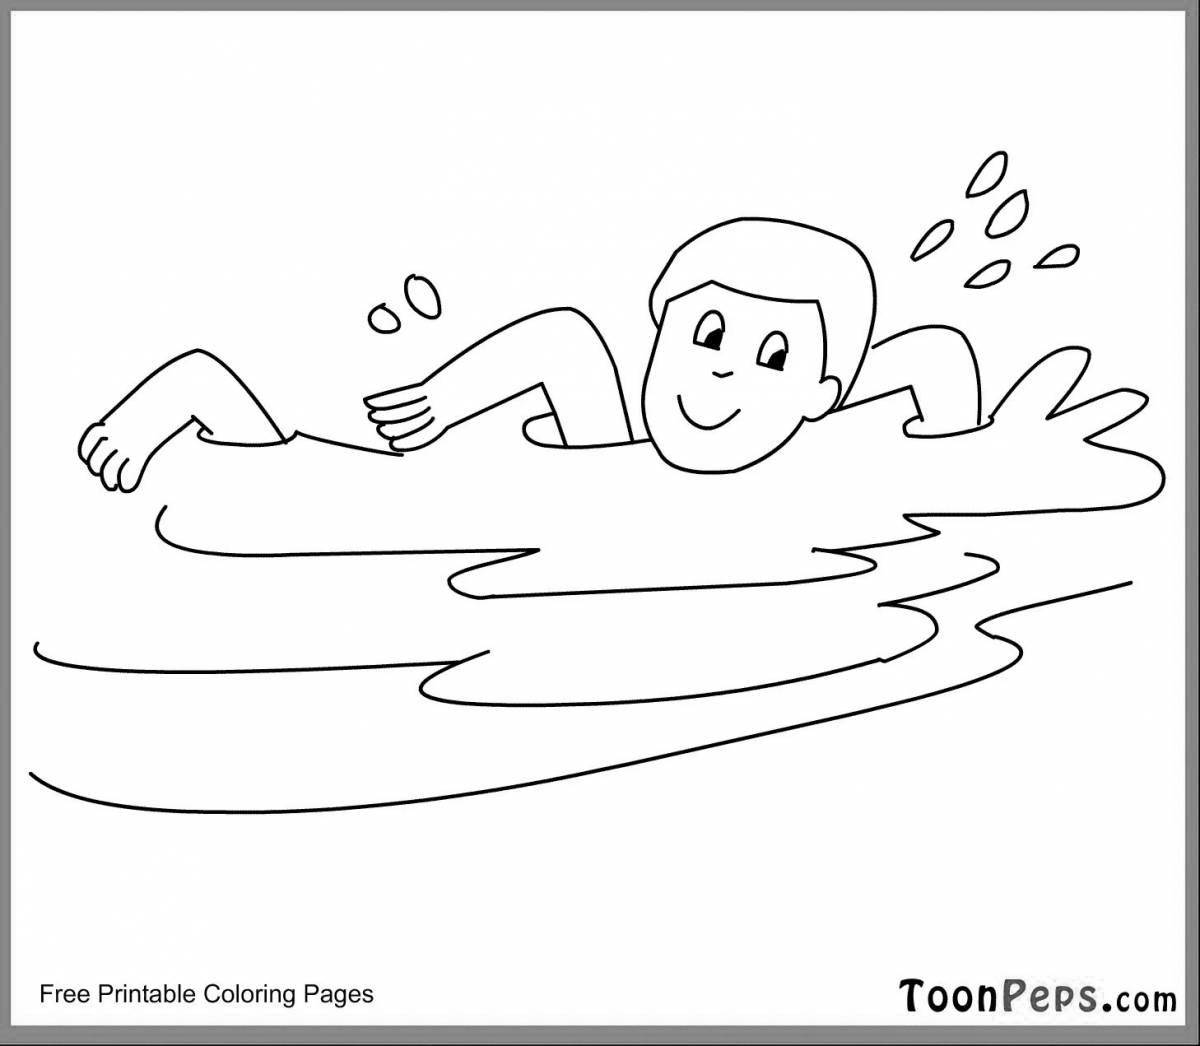 Inspirational swimming coloring book for kids